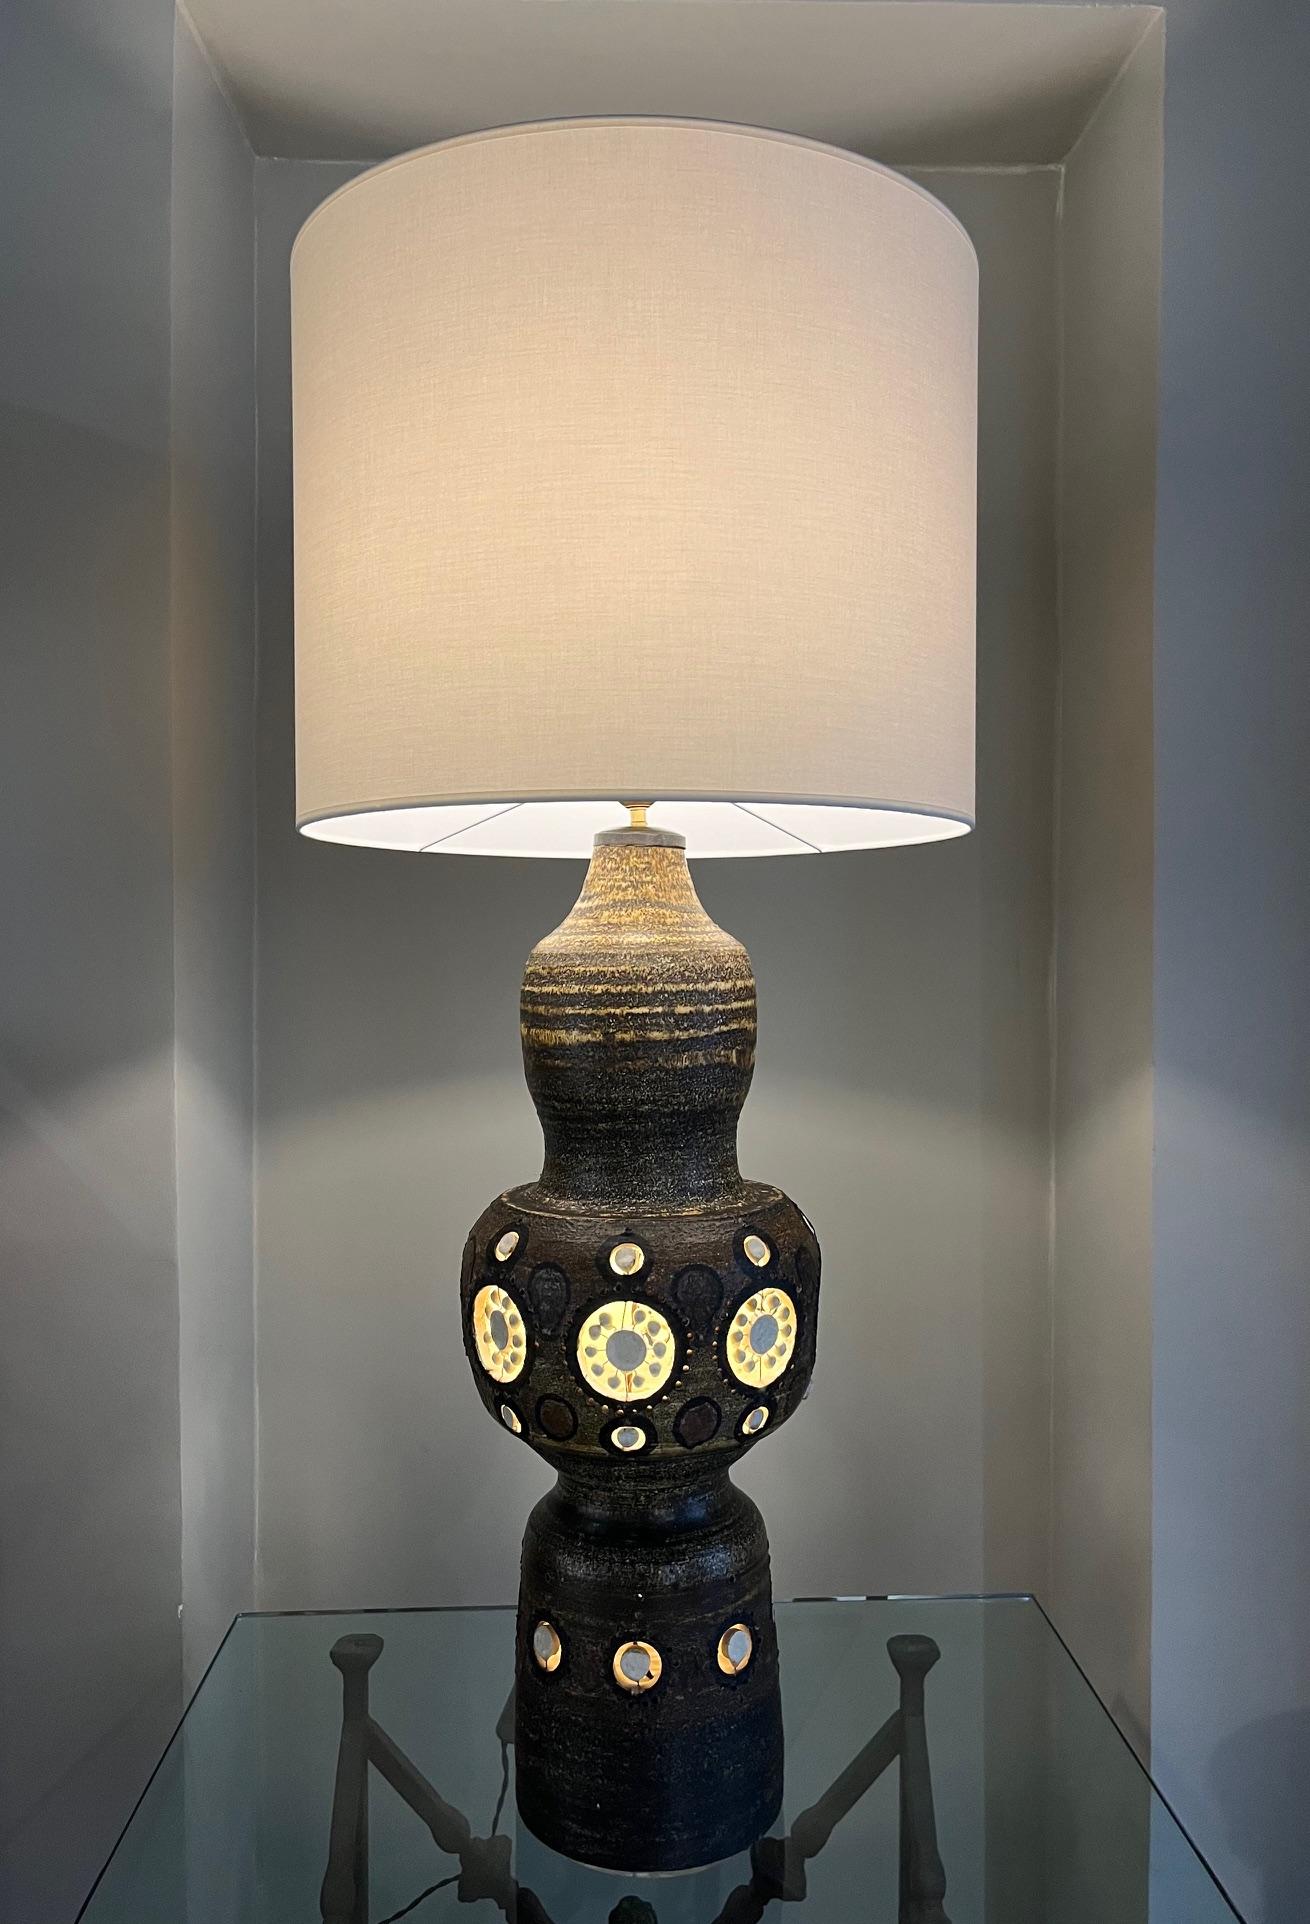  Tall ceramic lamp by Georges Pelletier.
Glazed ceramic with white glazed openwork around the body of the lamp. 
Electrified inside the lamp body.
South of France  ( Cannes) circa 1970 

There is a hole at the base of the collar. It is original and